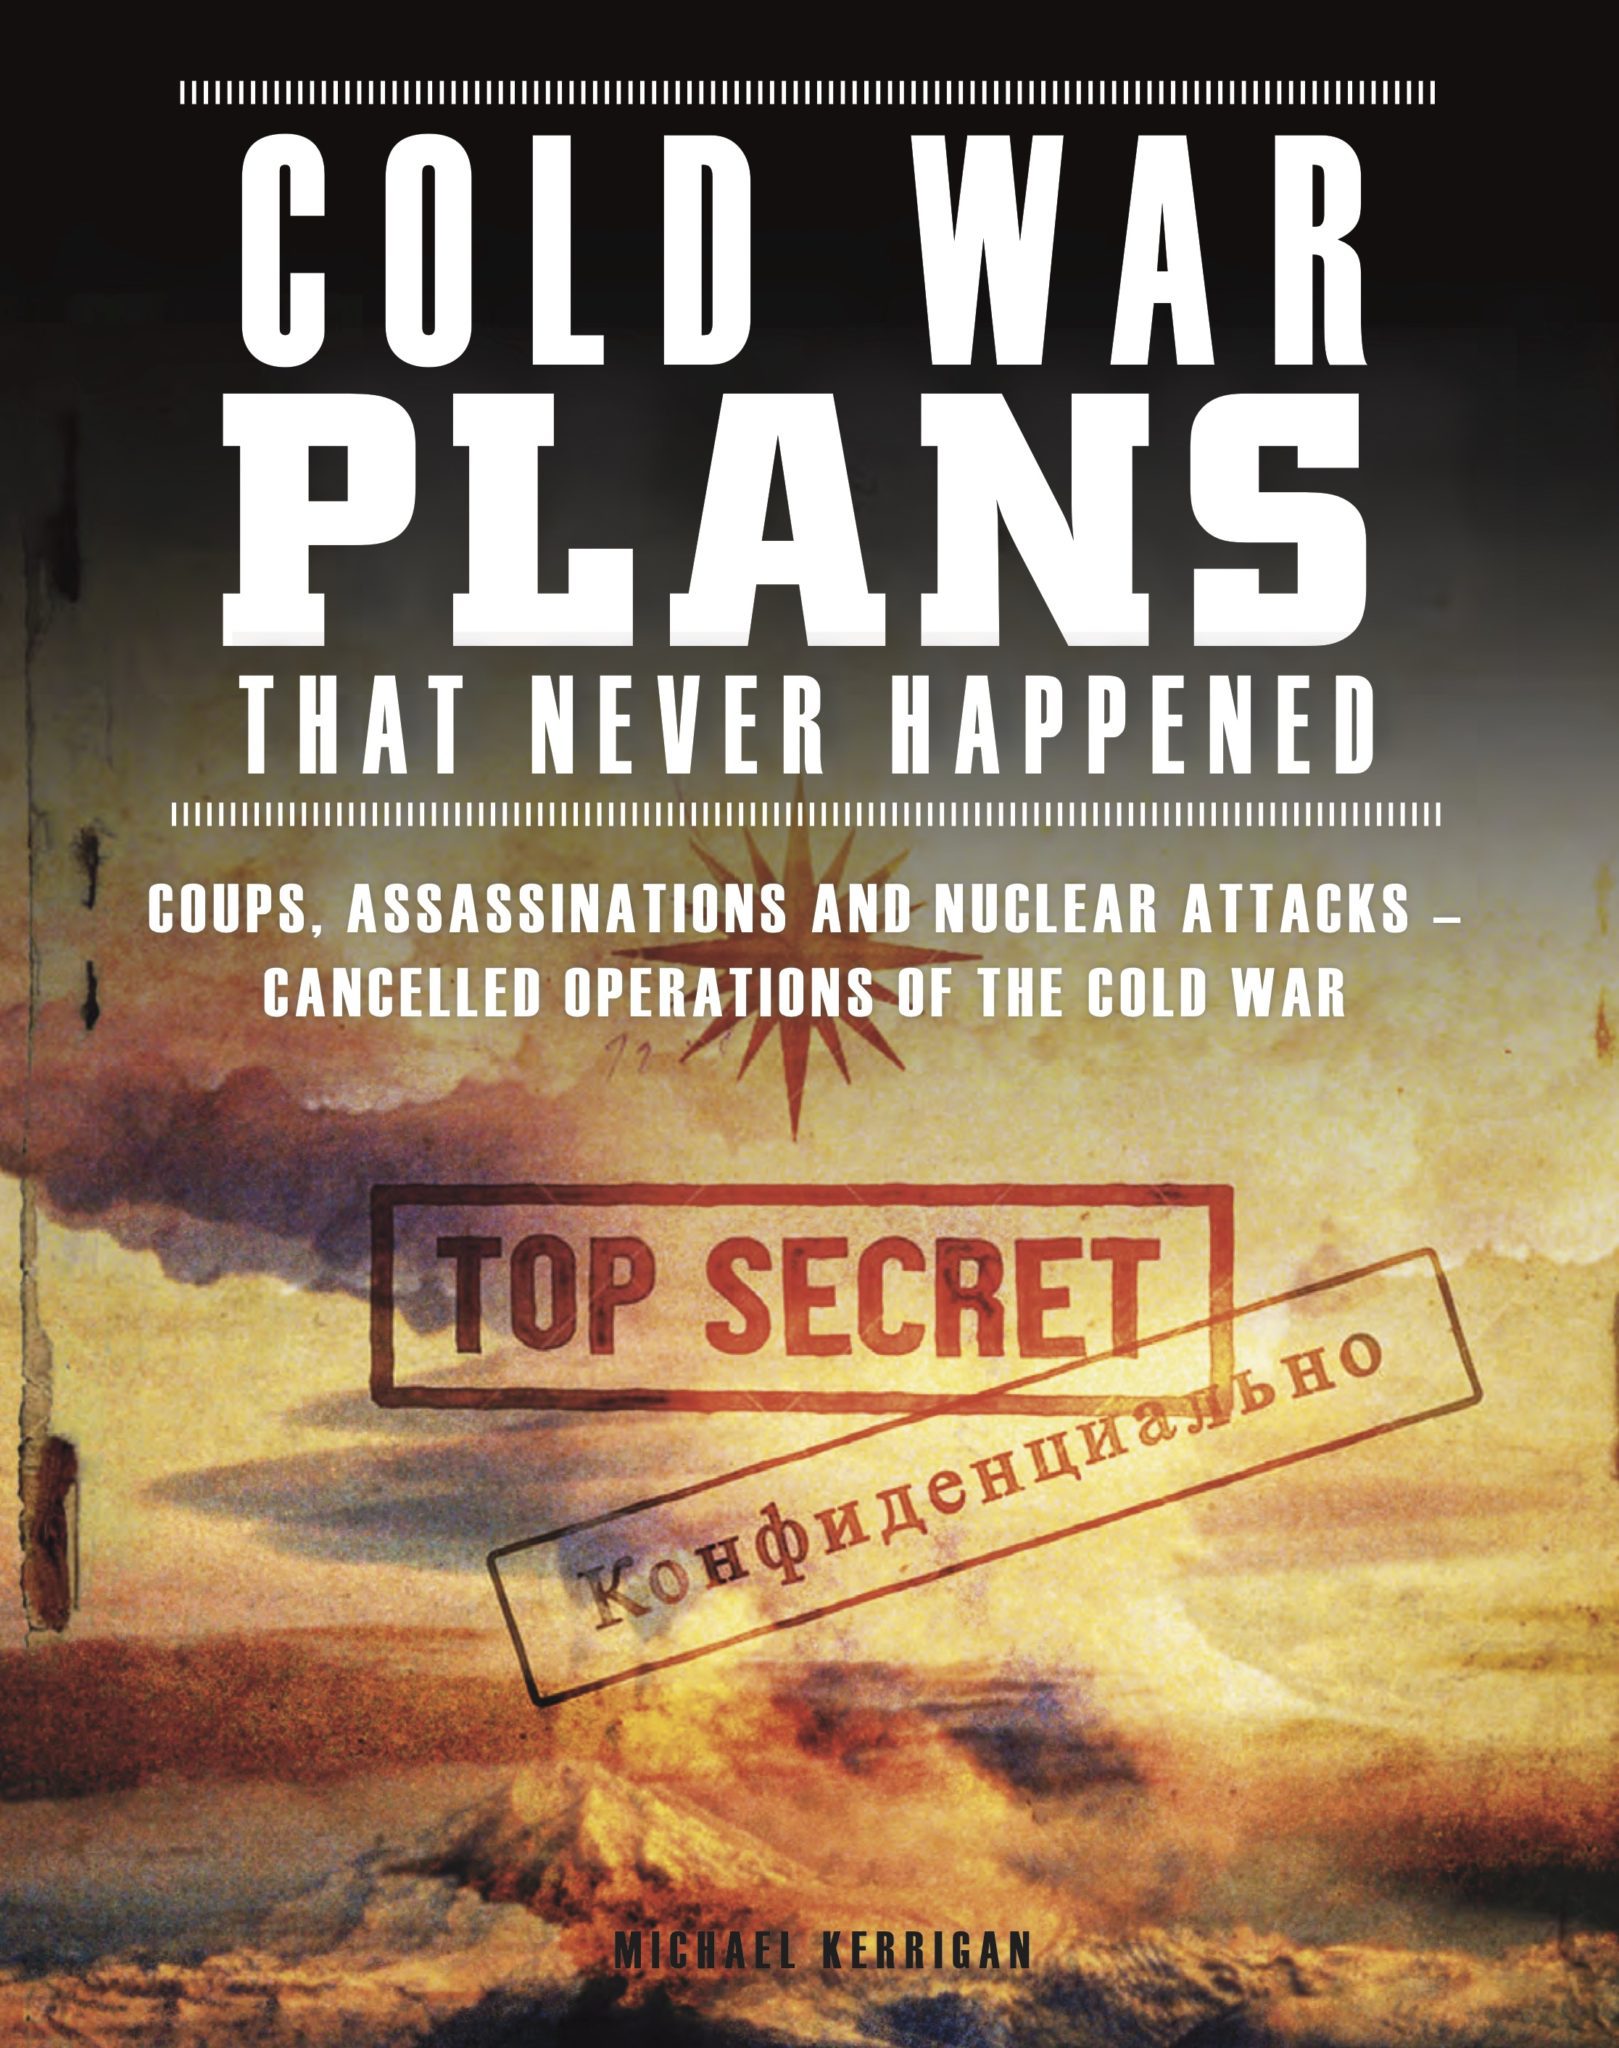 Cold War Plans That Never Happened